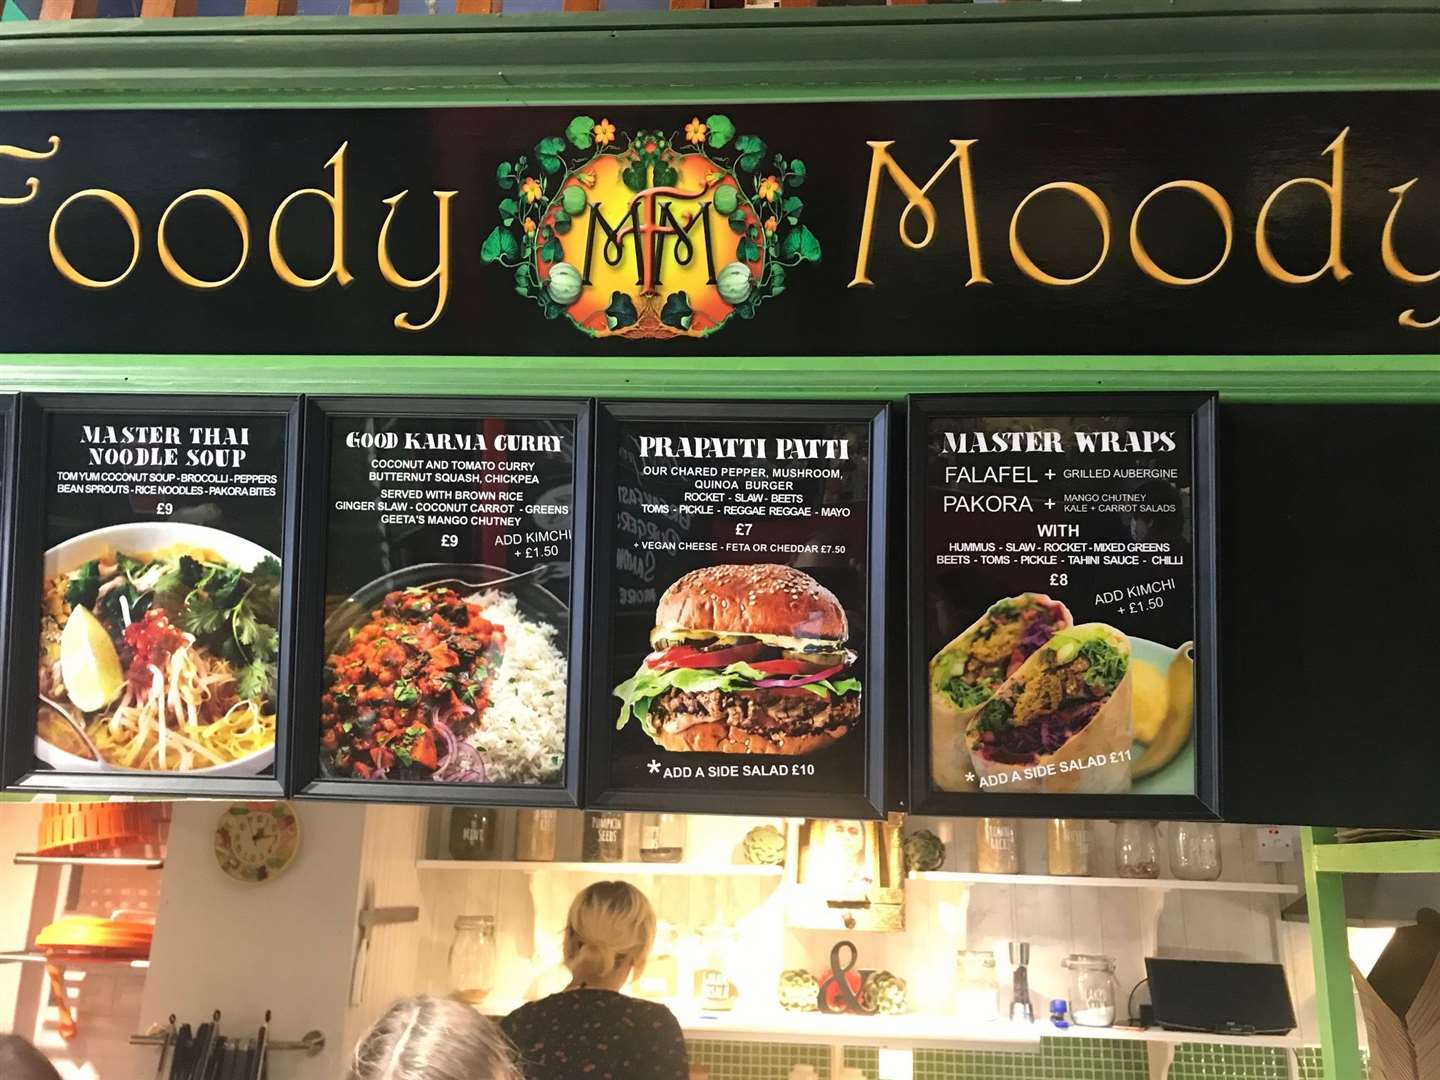 The main dishes - all of which are vegan - probably hit the target for Margate's new vibe